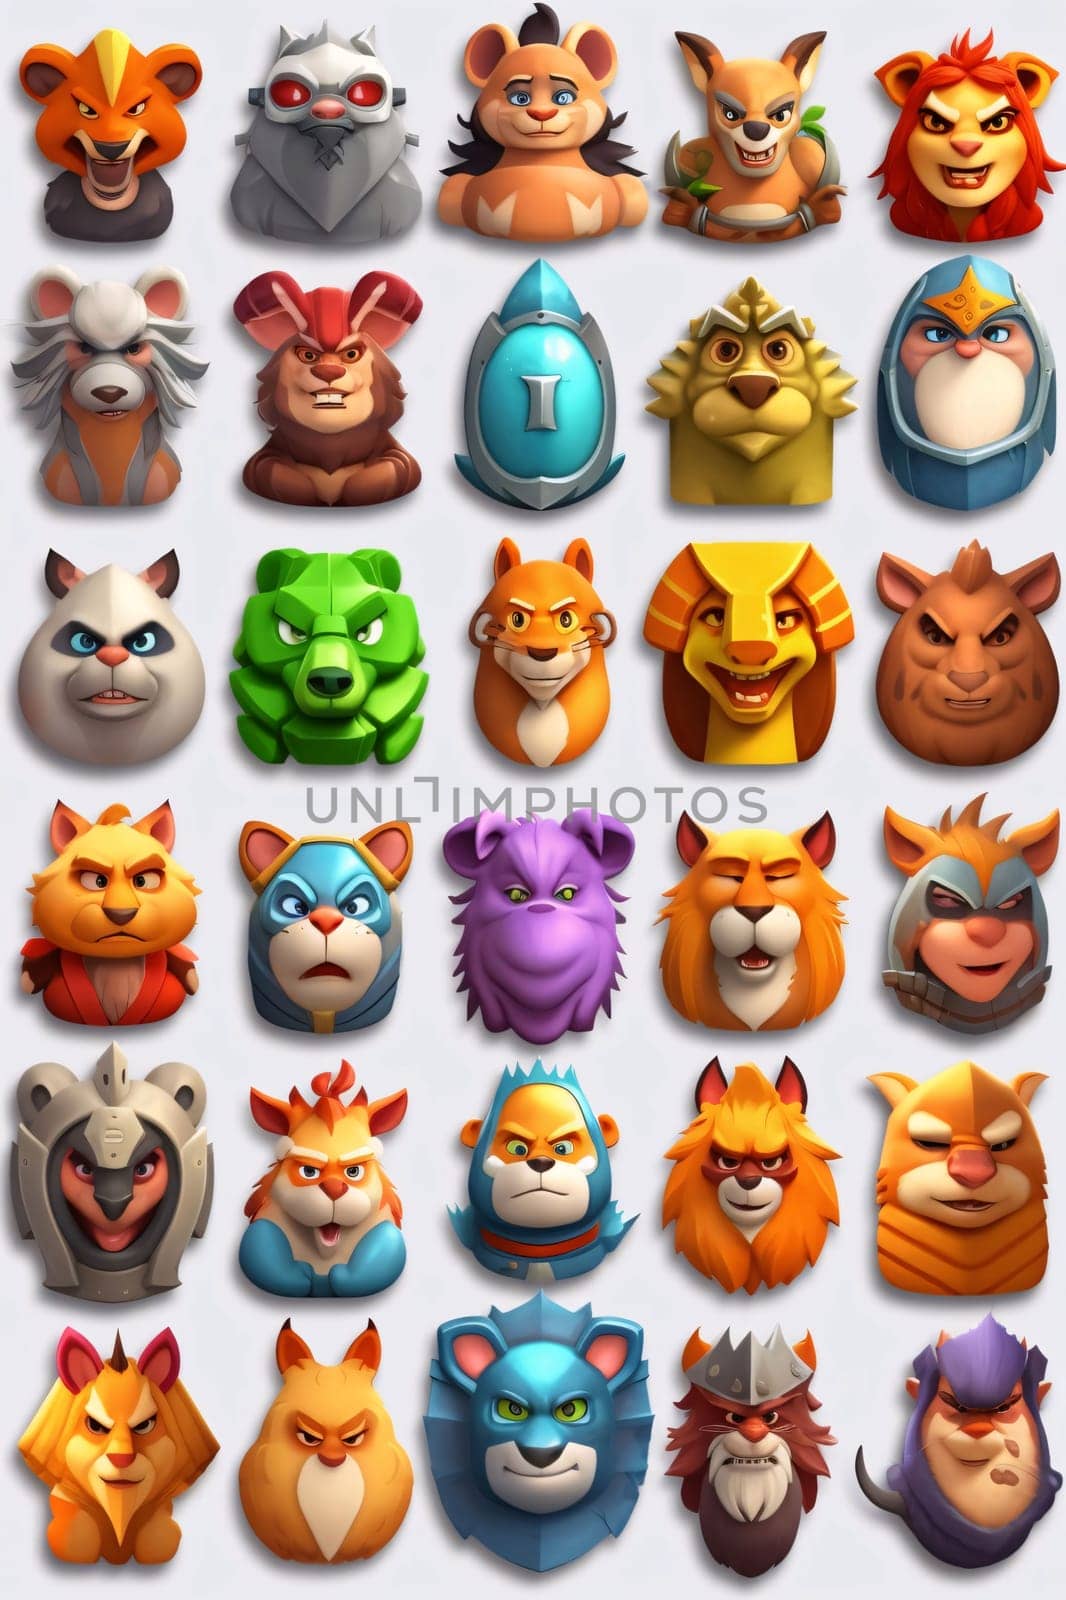 New icons collection: Big set of cartoon animal faces. Vector illustration. Isolated.